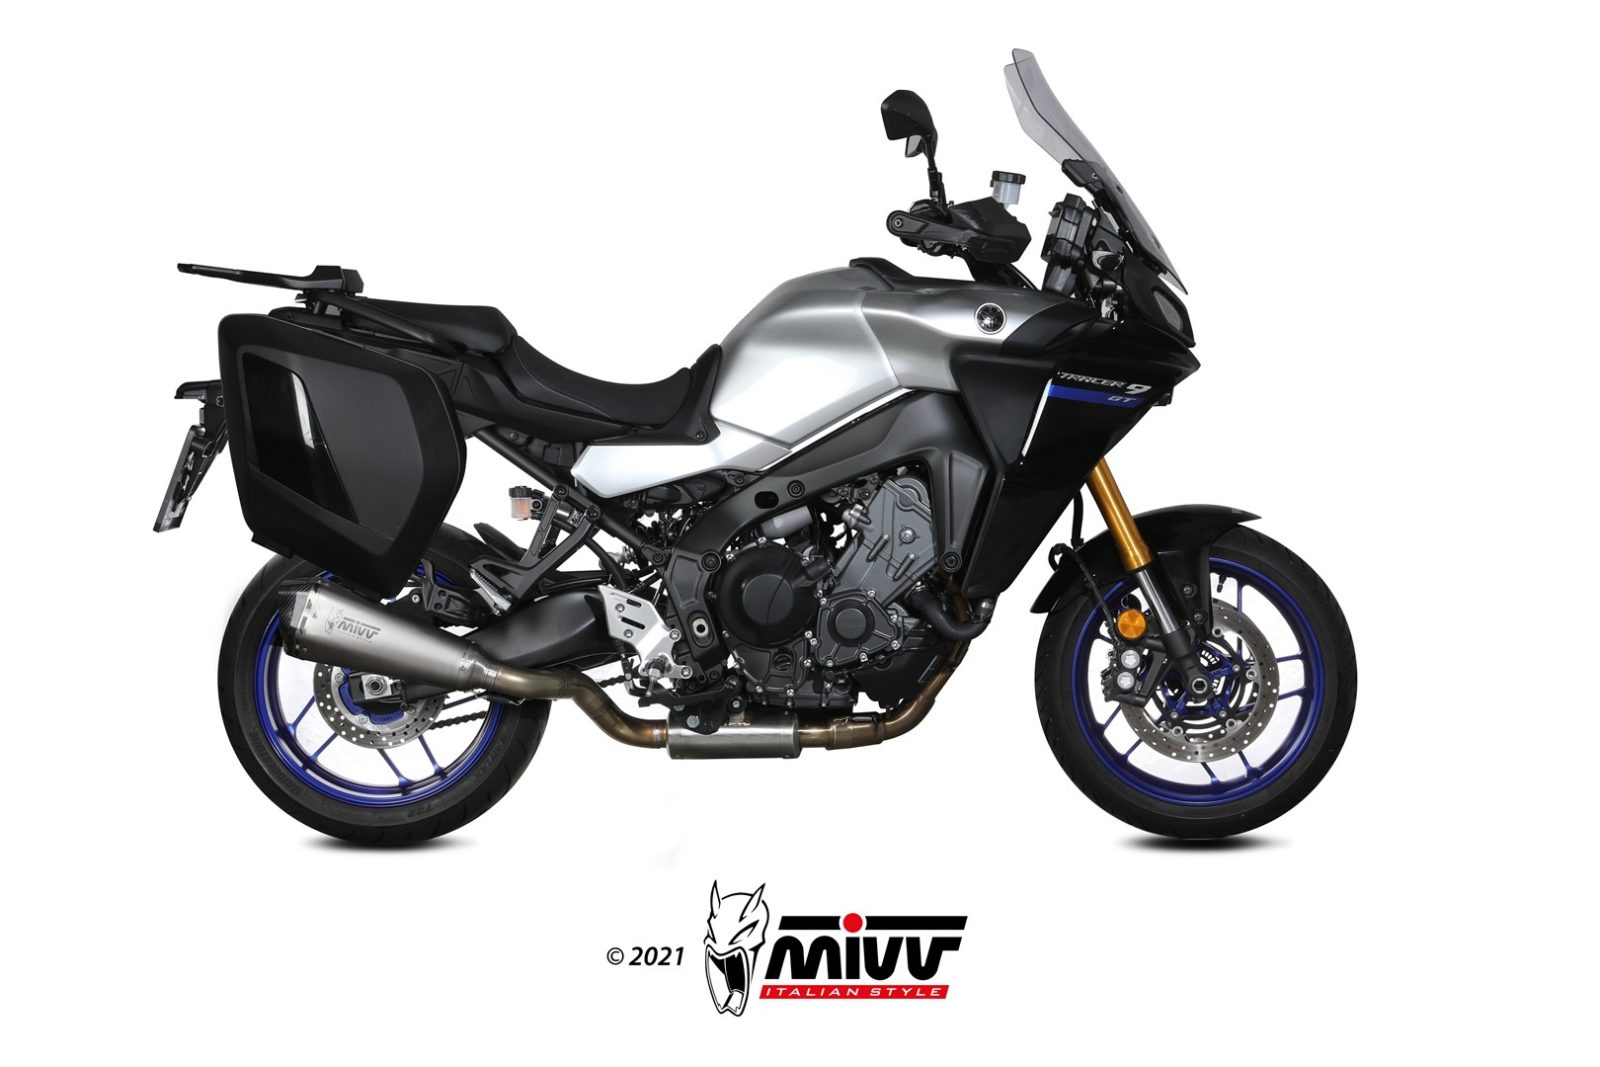 THREE COMPLETE EXHAUST SYSTEMS FOR YAMAHA MT-09 2021 - Mivv